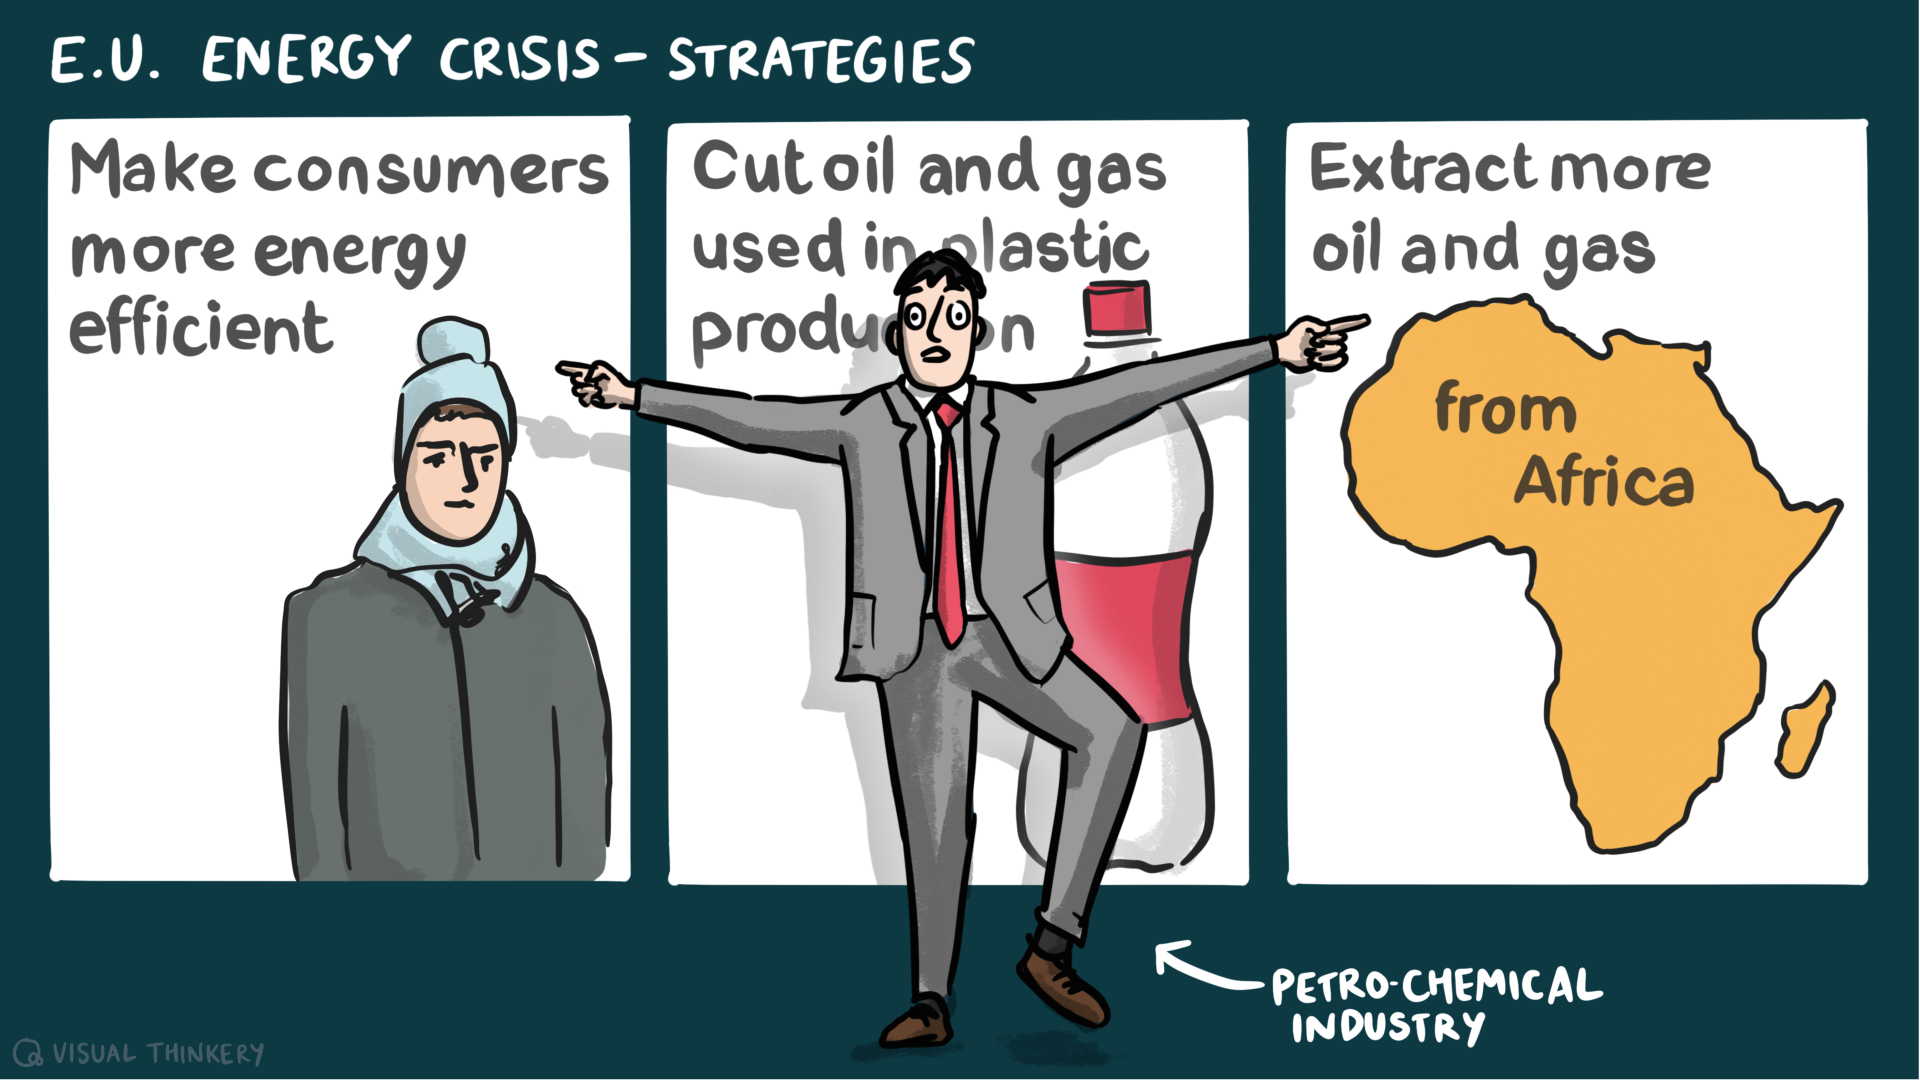 A three-paned cartoon image titled “E.U. Energy Crisis - Strategies.“ The first pane shows a person bundled in winter clothes with text that reads “Make consumers more energy efficient.“ The second pane shows a plastic beverage bottle with text that reads, “Cut oil and gas used in plastic production.“ However, in front of this text is a person in a suit representing the petrochemical industry, waving their arms to cover the text. In the third pane is an outline of the continent of Africa with text overlaid that reads “Extract more oil and gas from Africa.“ 